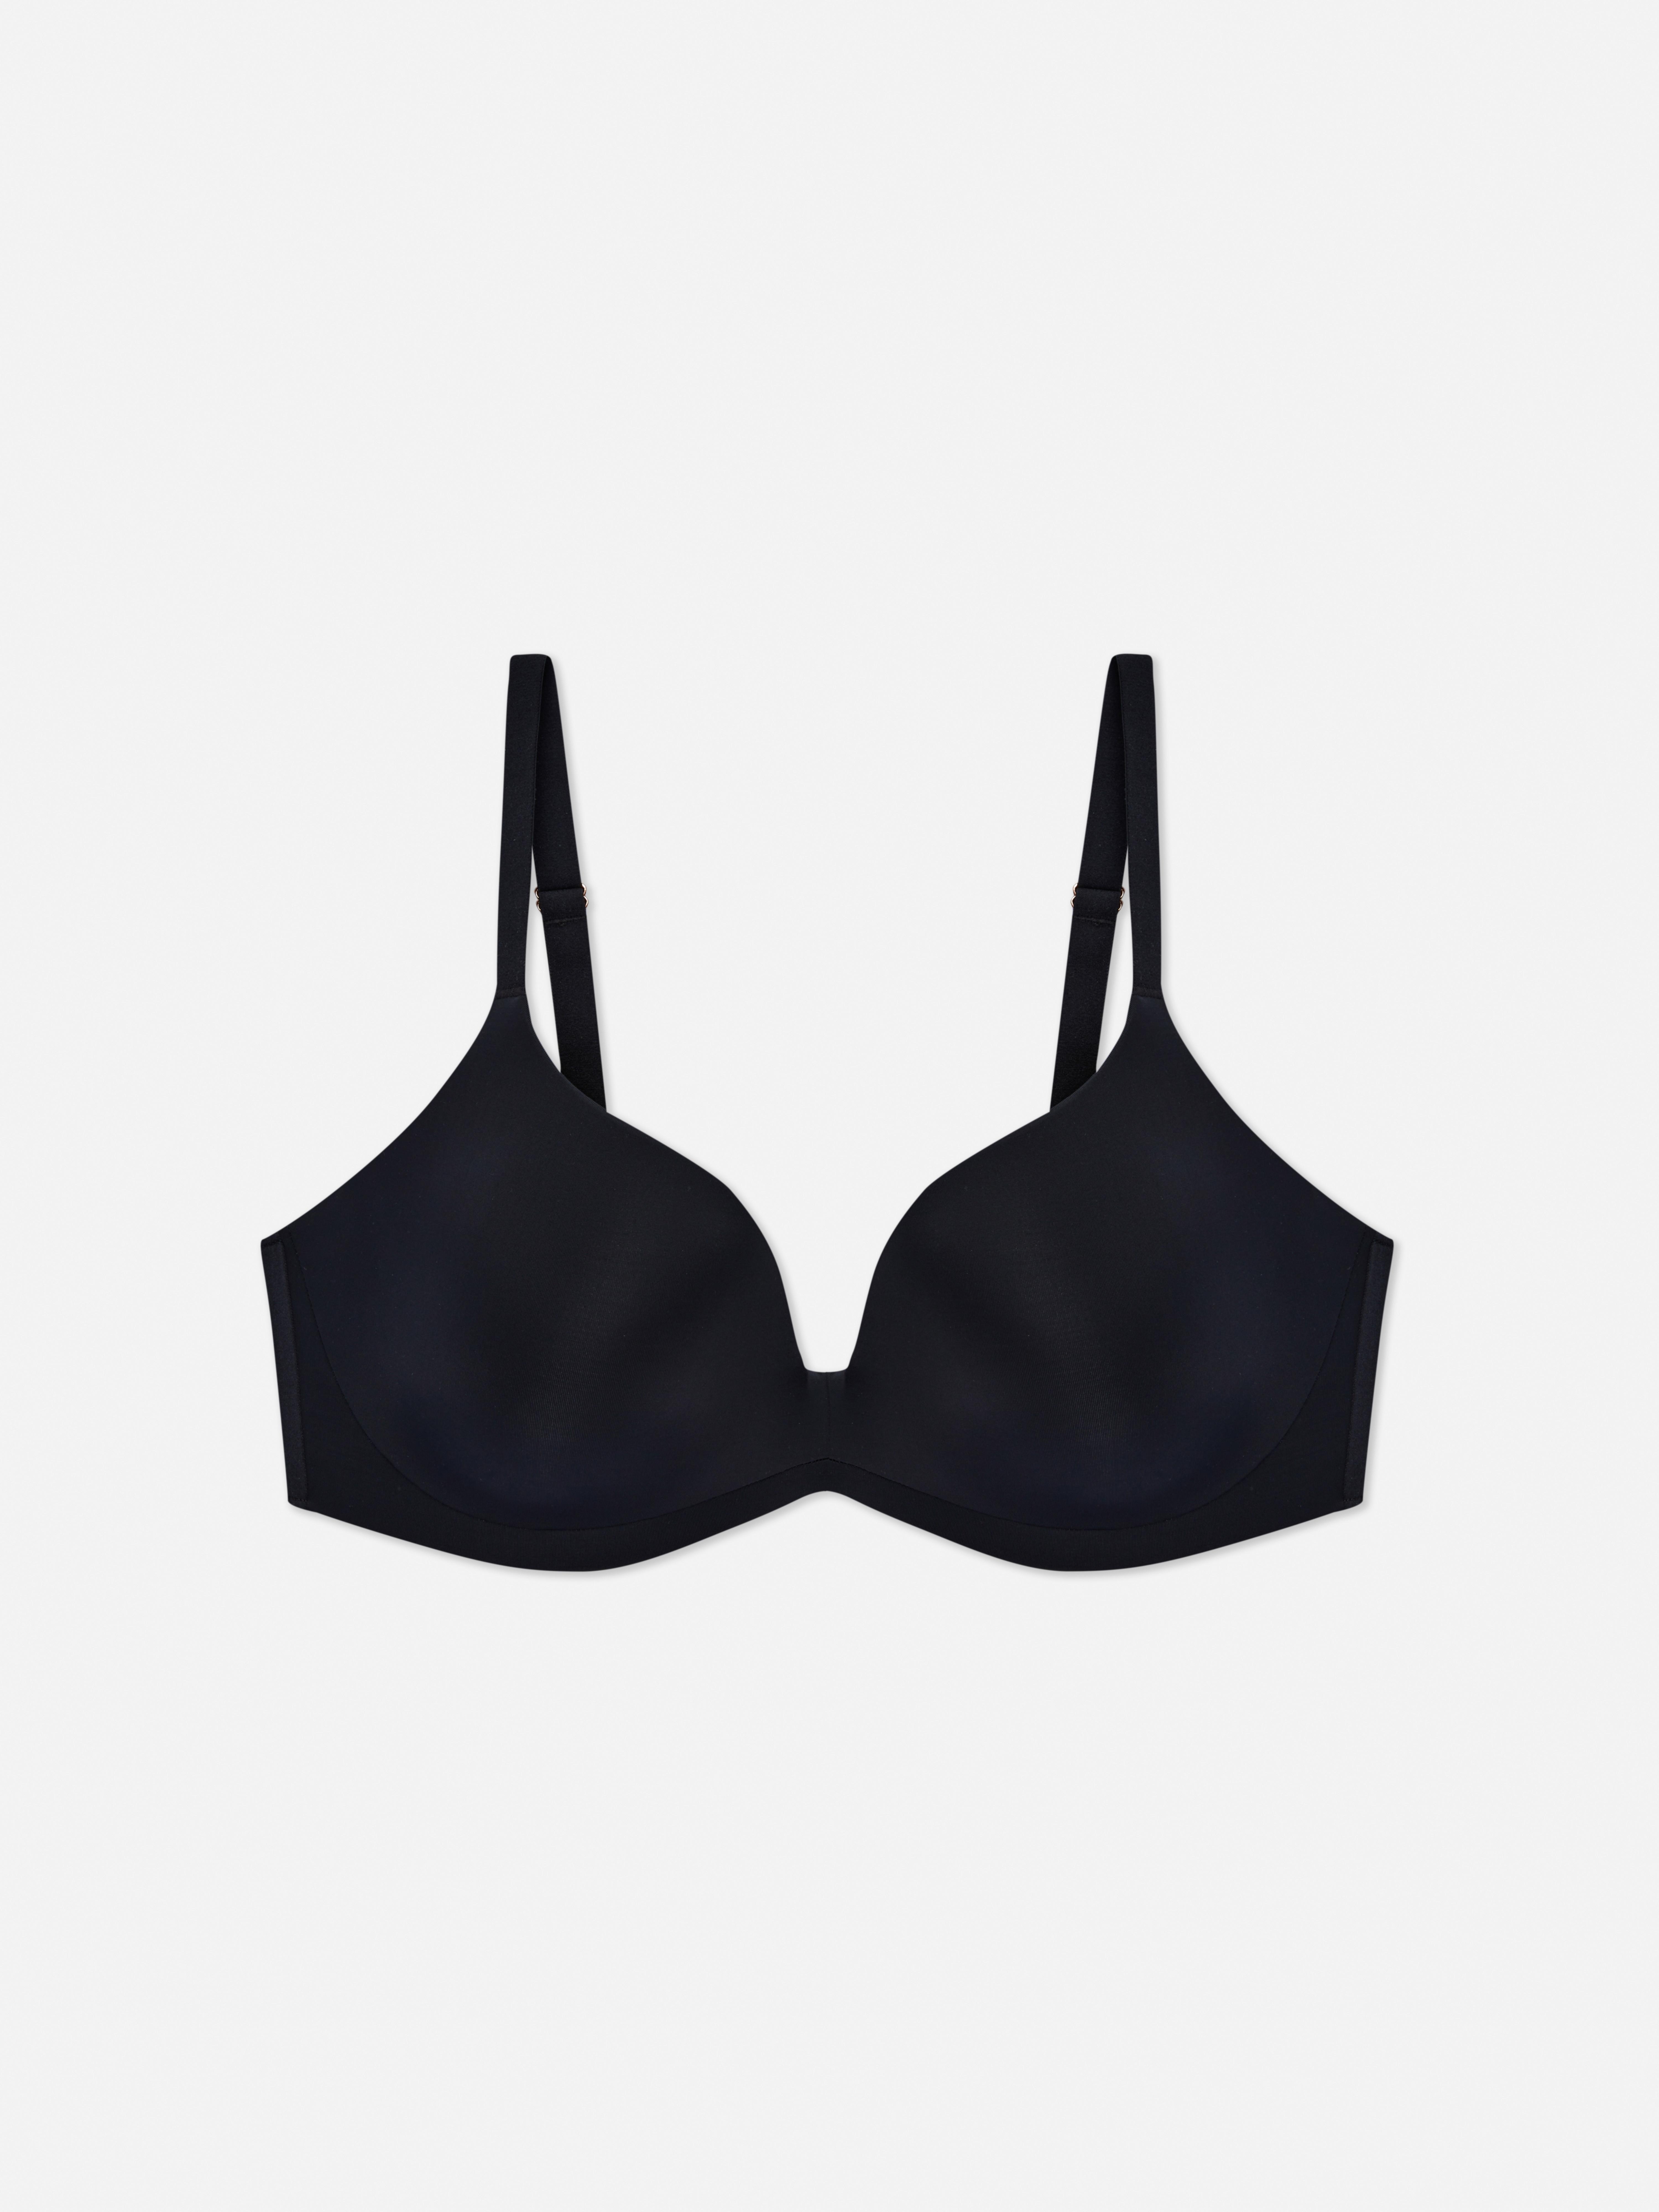 Everyday luxury non padded wired bra from primark